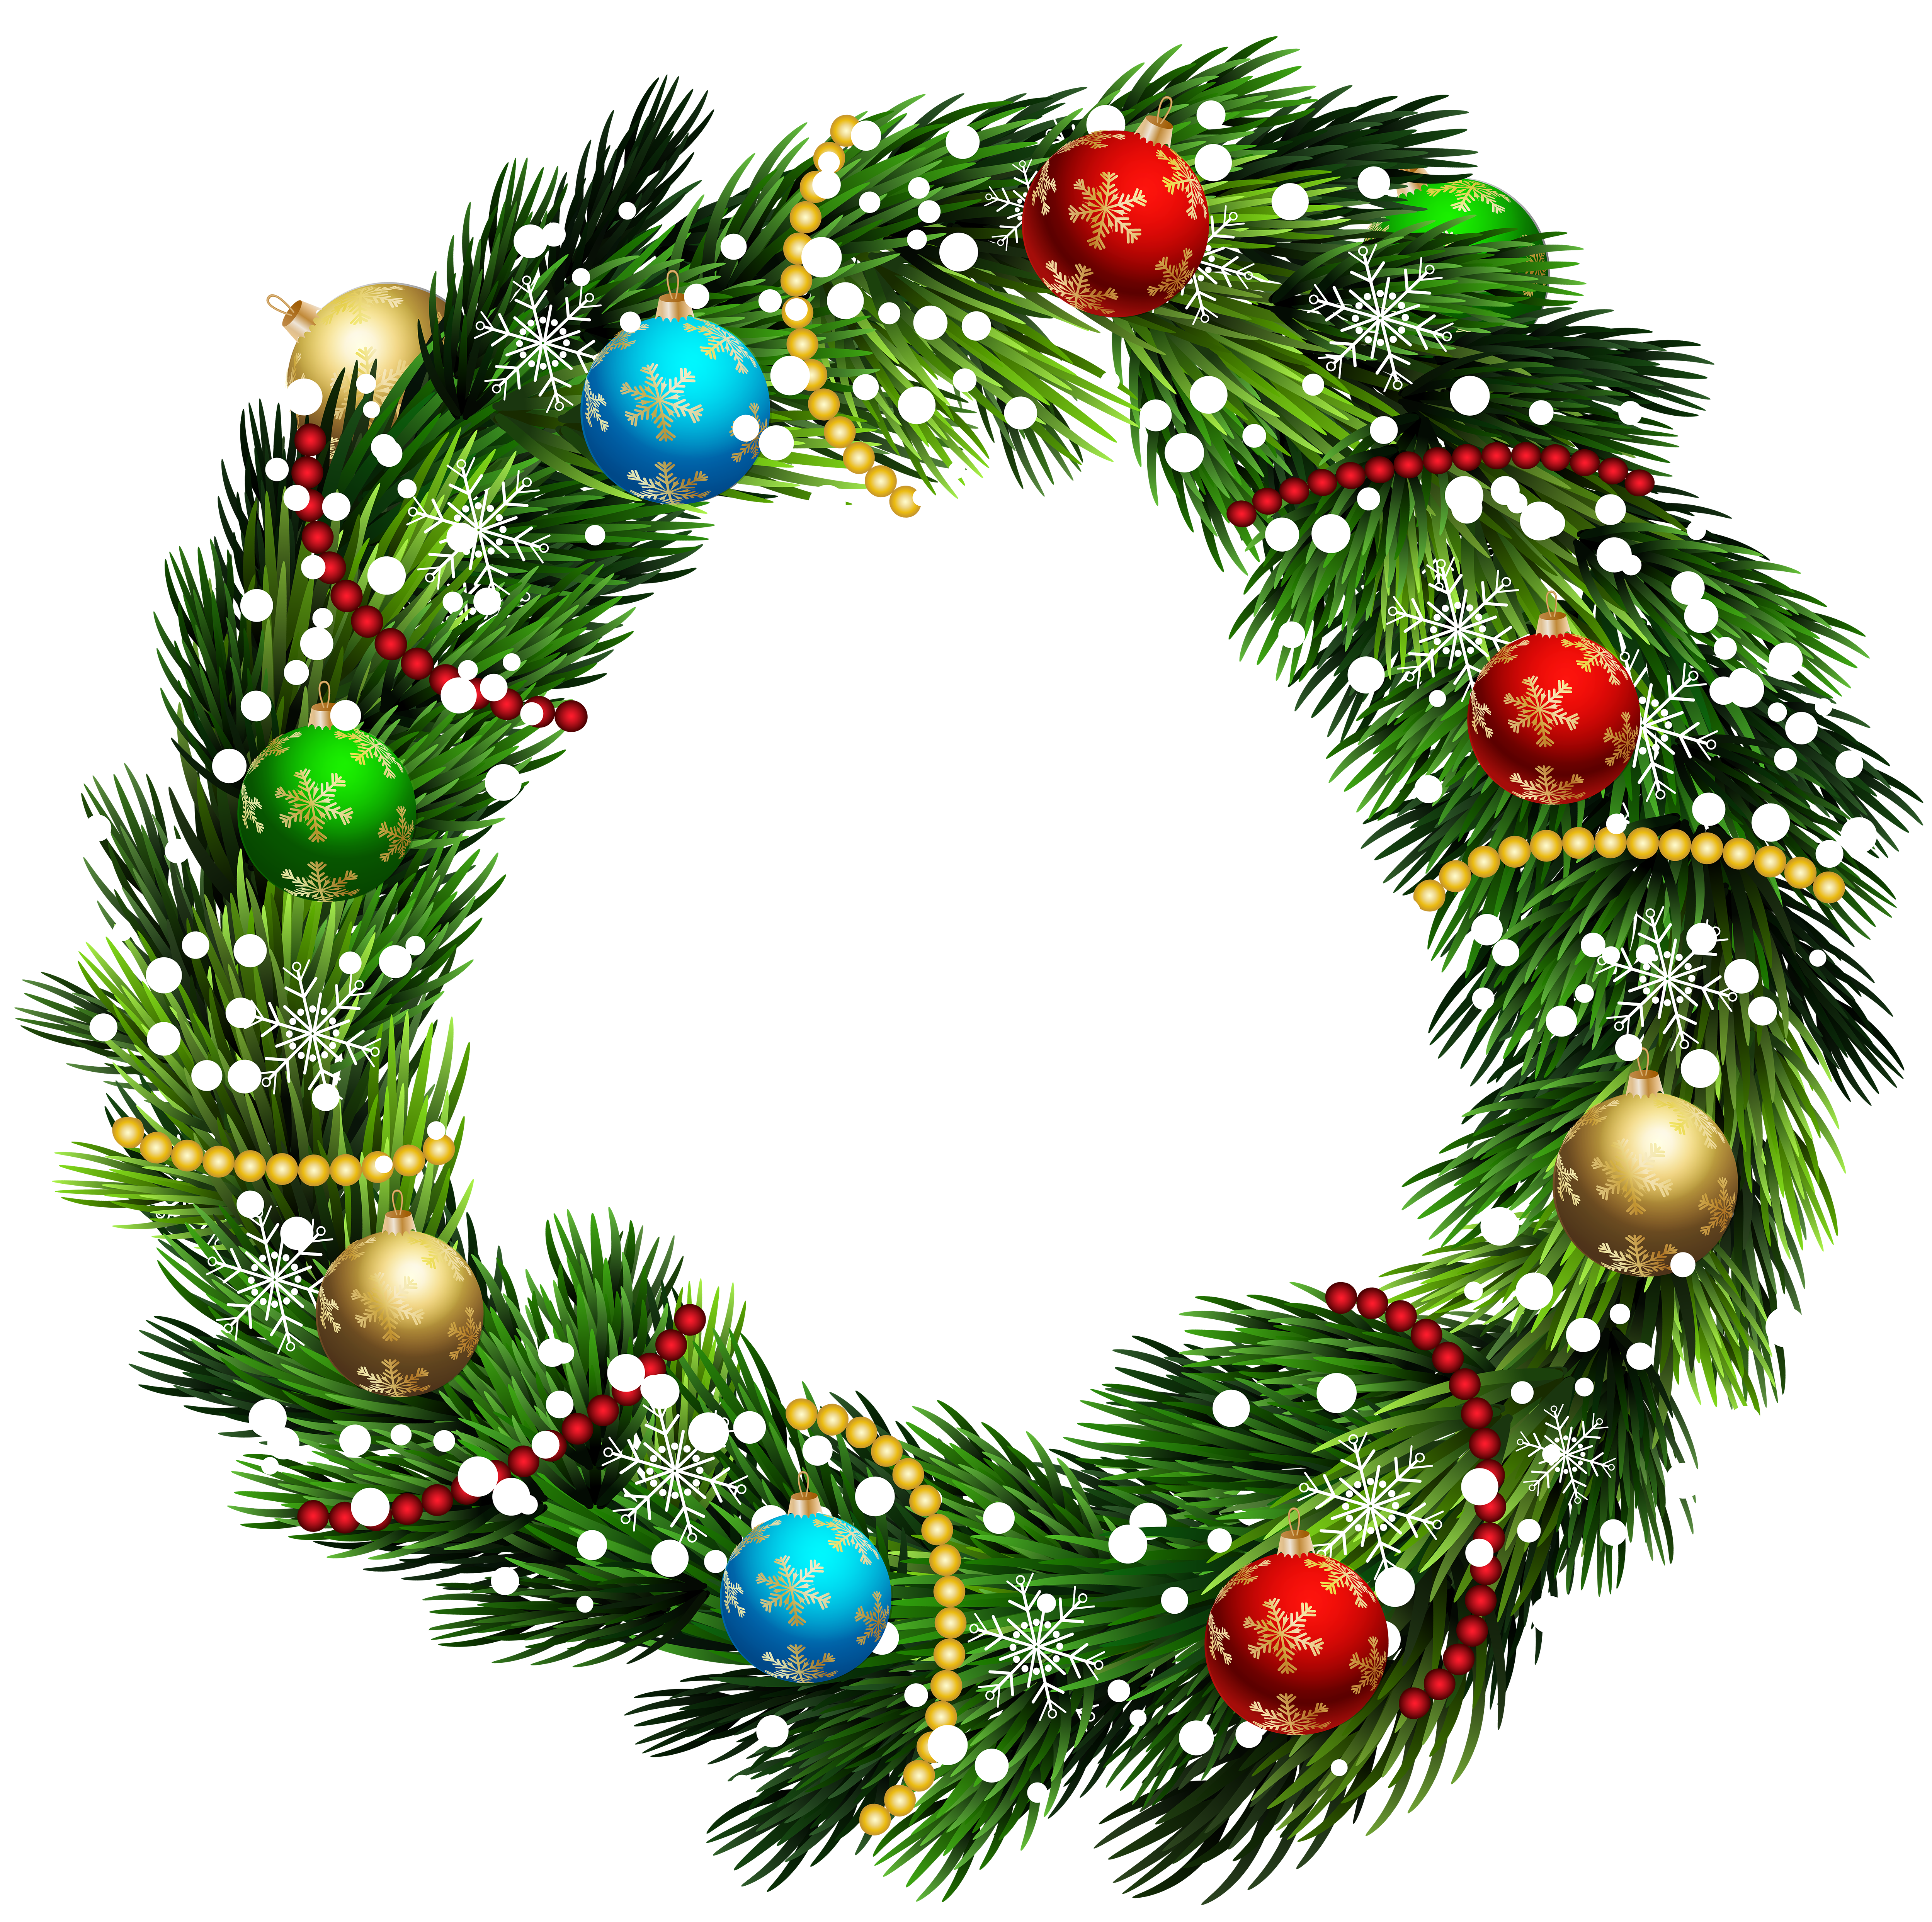 Wreath Ornament Christmas HD Image Free PNG PNG Image